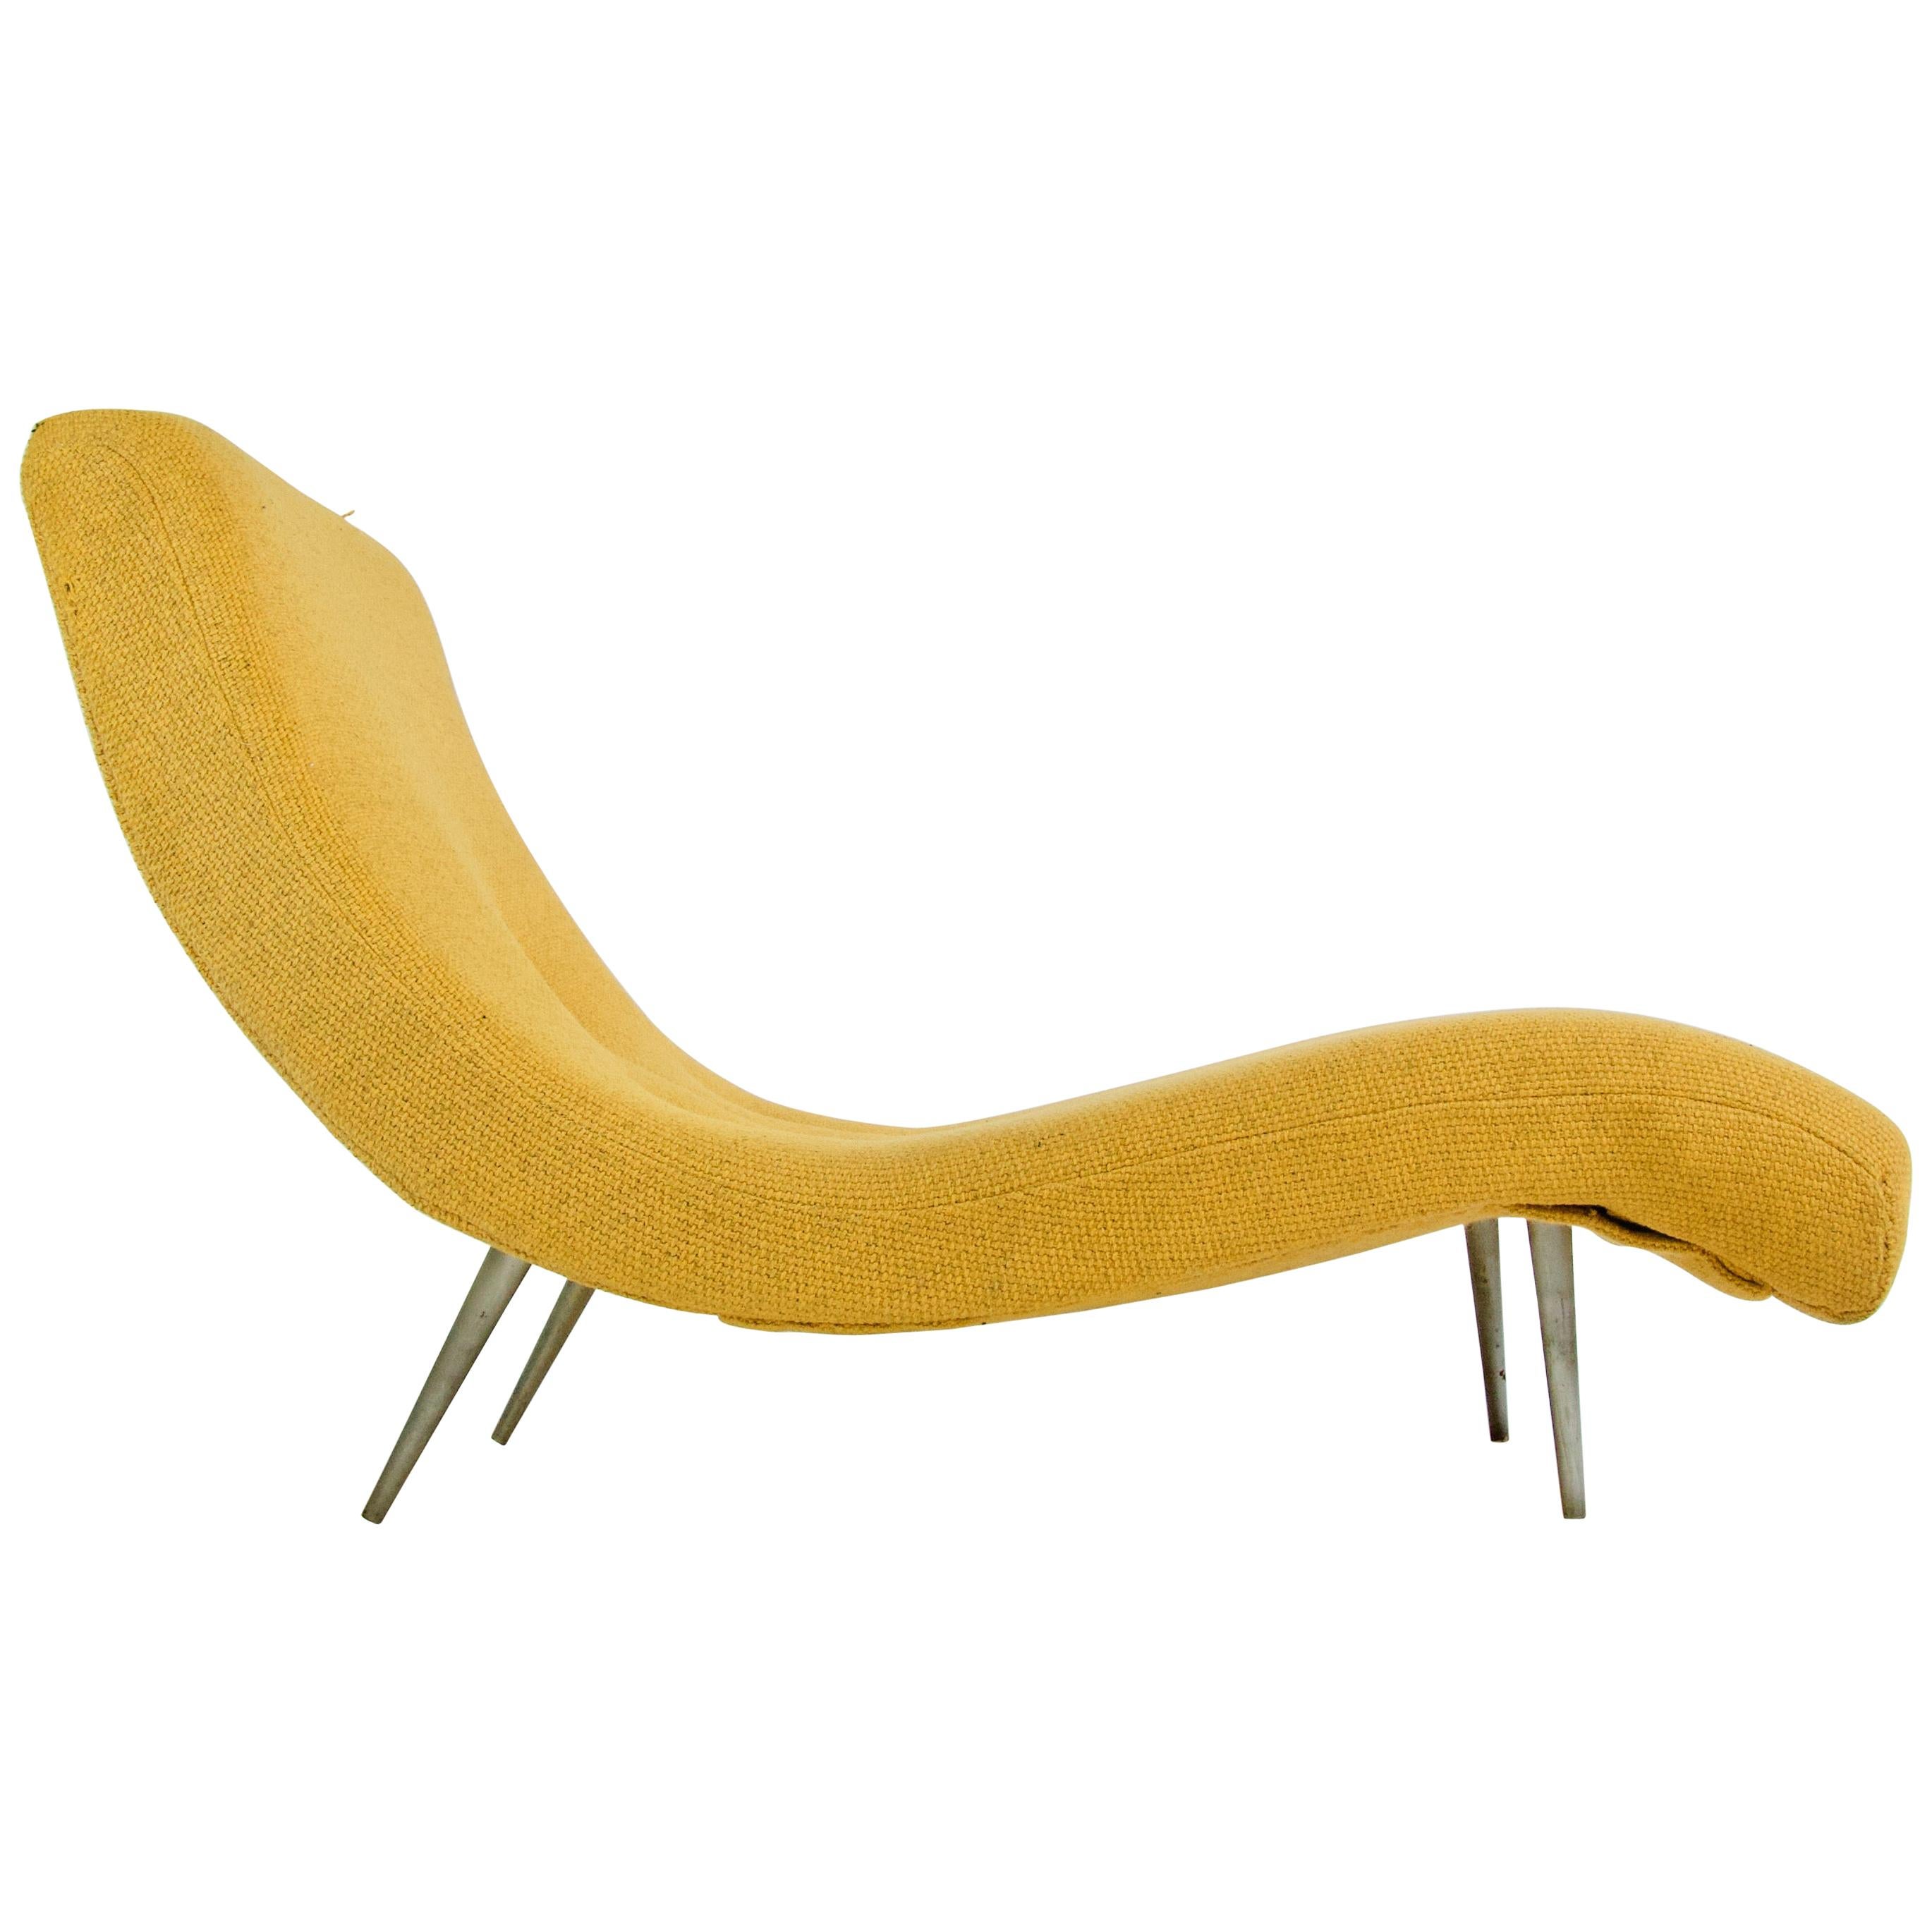 Adrian Pearsall for Craft Associates Chaise Lounge For Sale